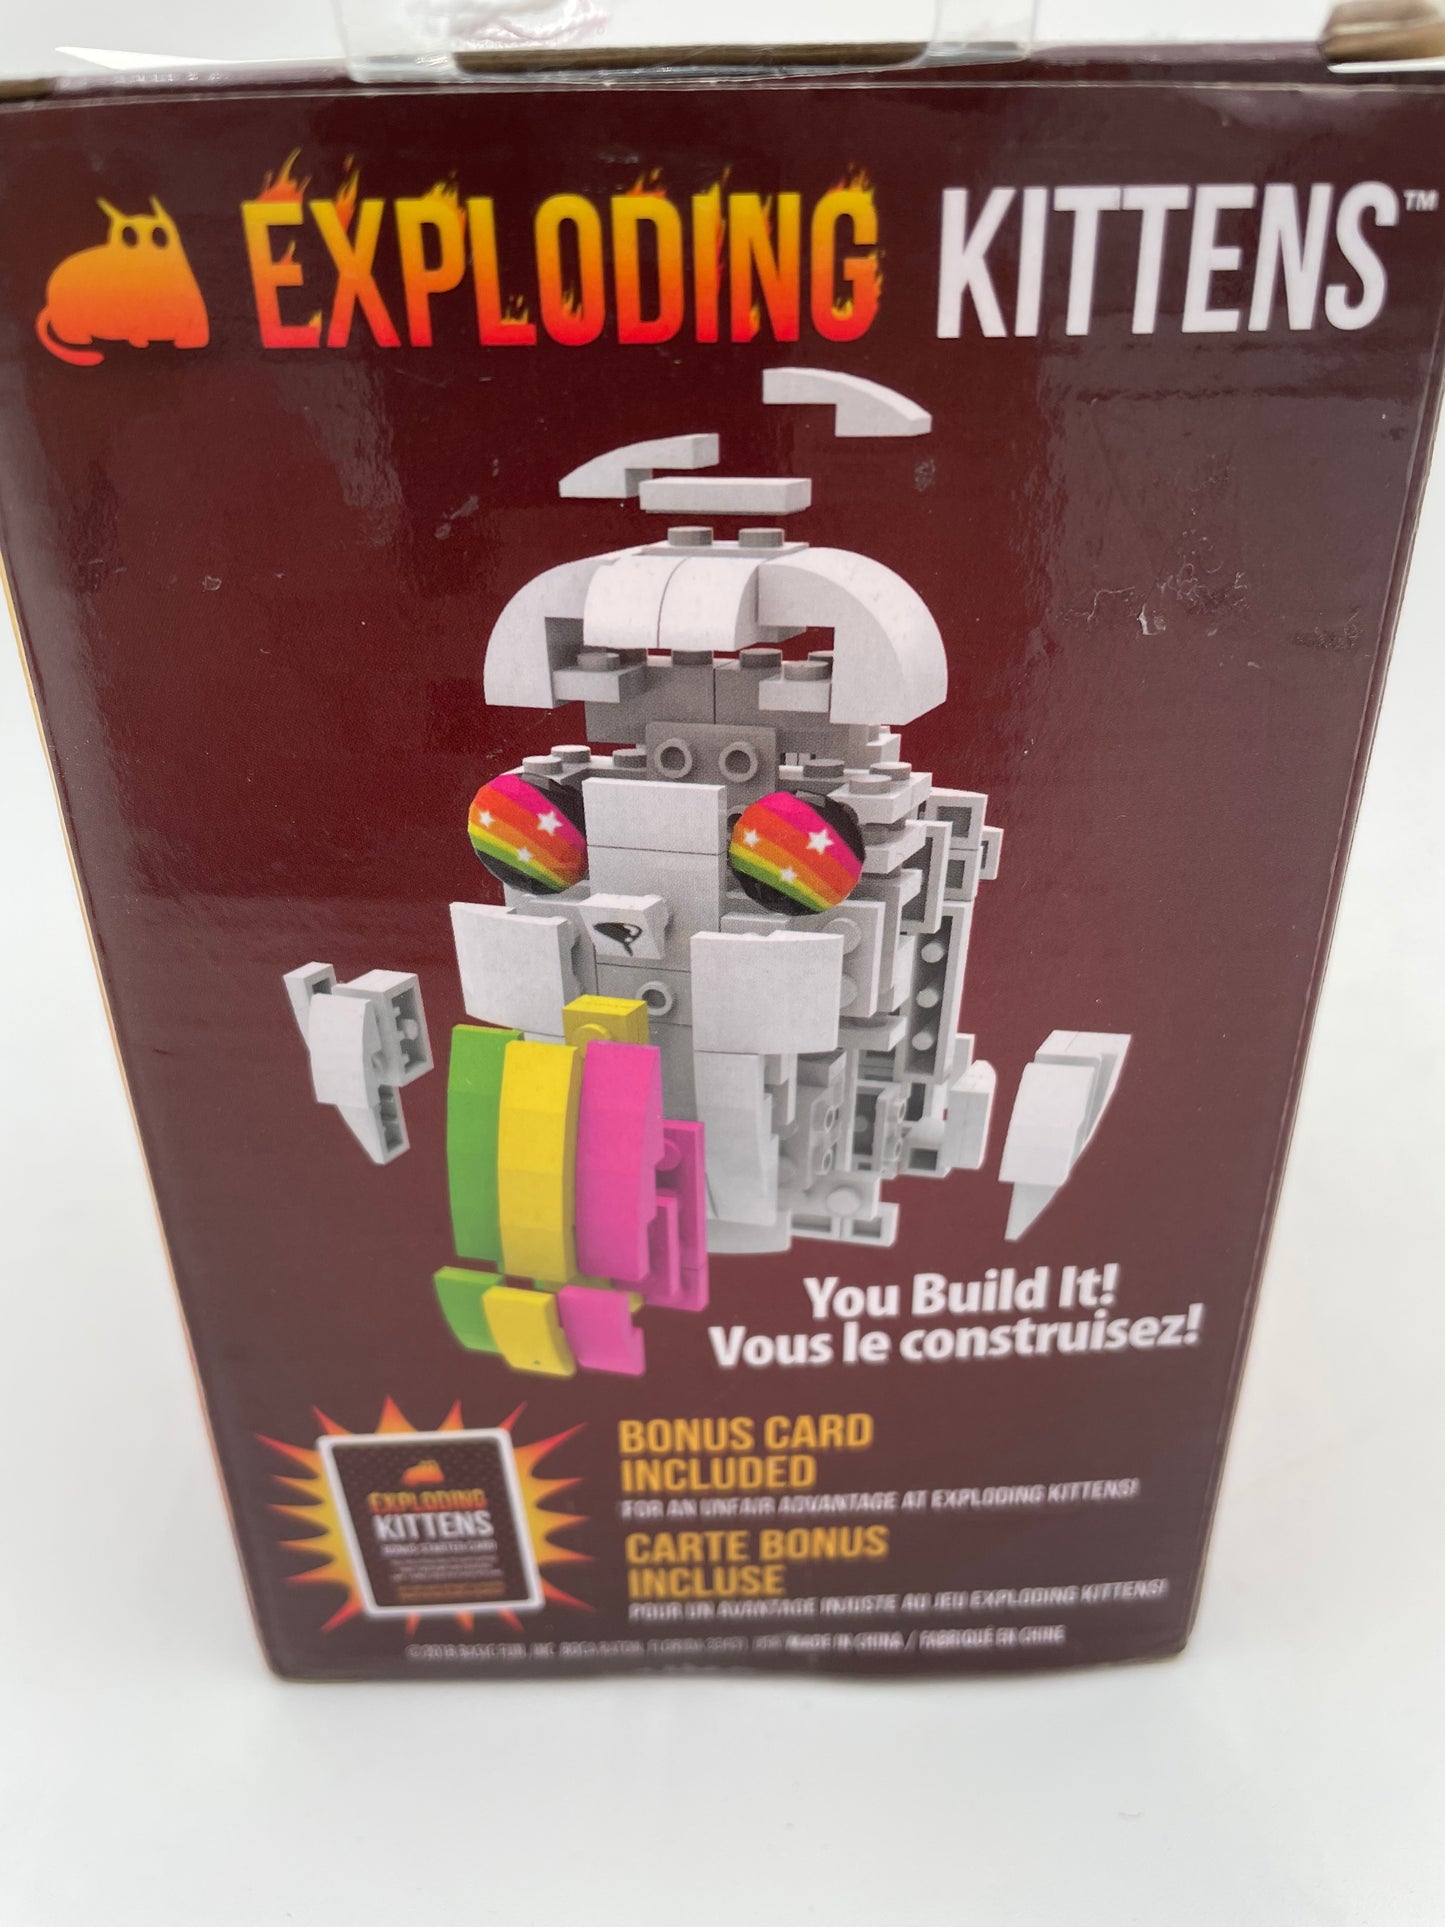 Buildable Exploding Kittens - Rainbow Ralphing Cat 2018 #100365